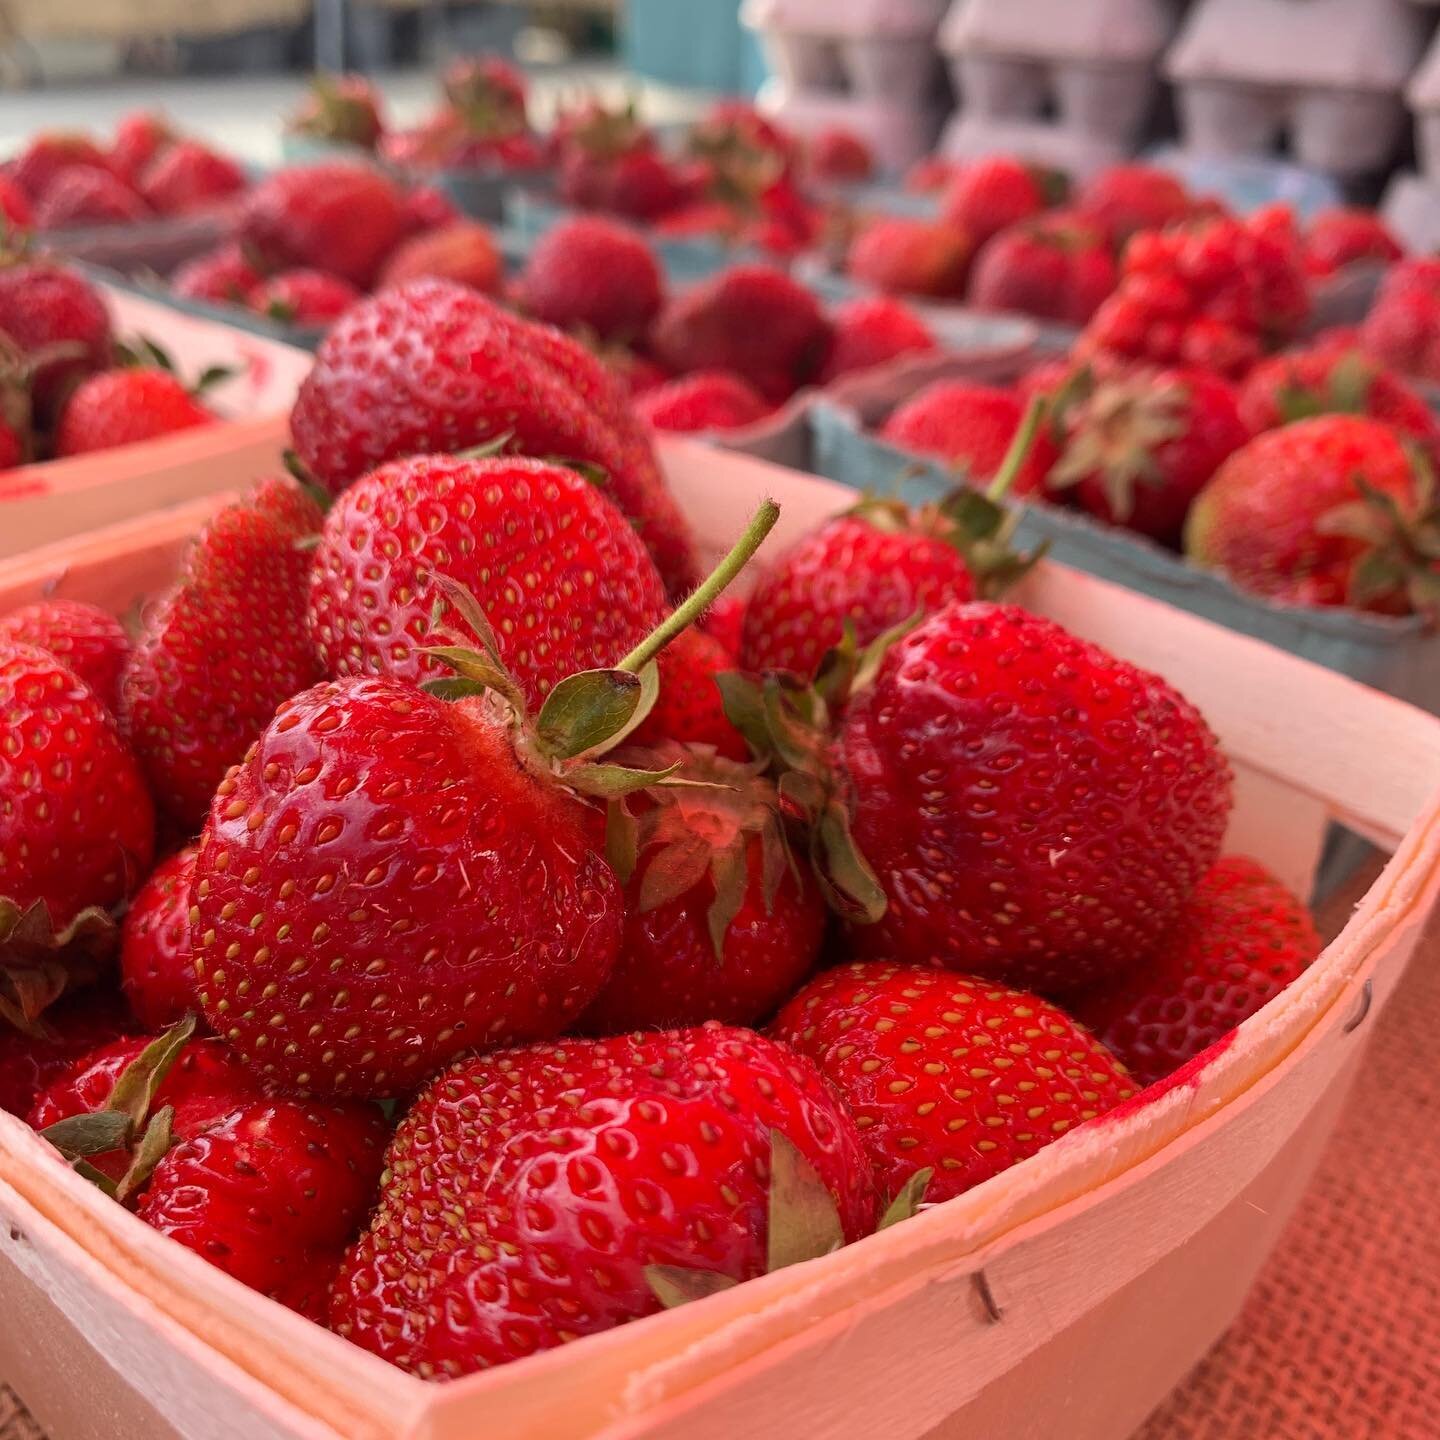 It&rsquo;s FINALLY that time of year again 🤩 Fresh Strawberries! Nothing beats going to the farmers market and having the smell of strawberries floating through the air 🍓 Today we are at the #ScarboroughMaine Farmers Market with these sweet treats 